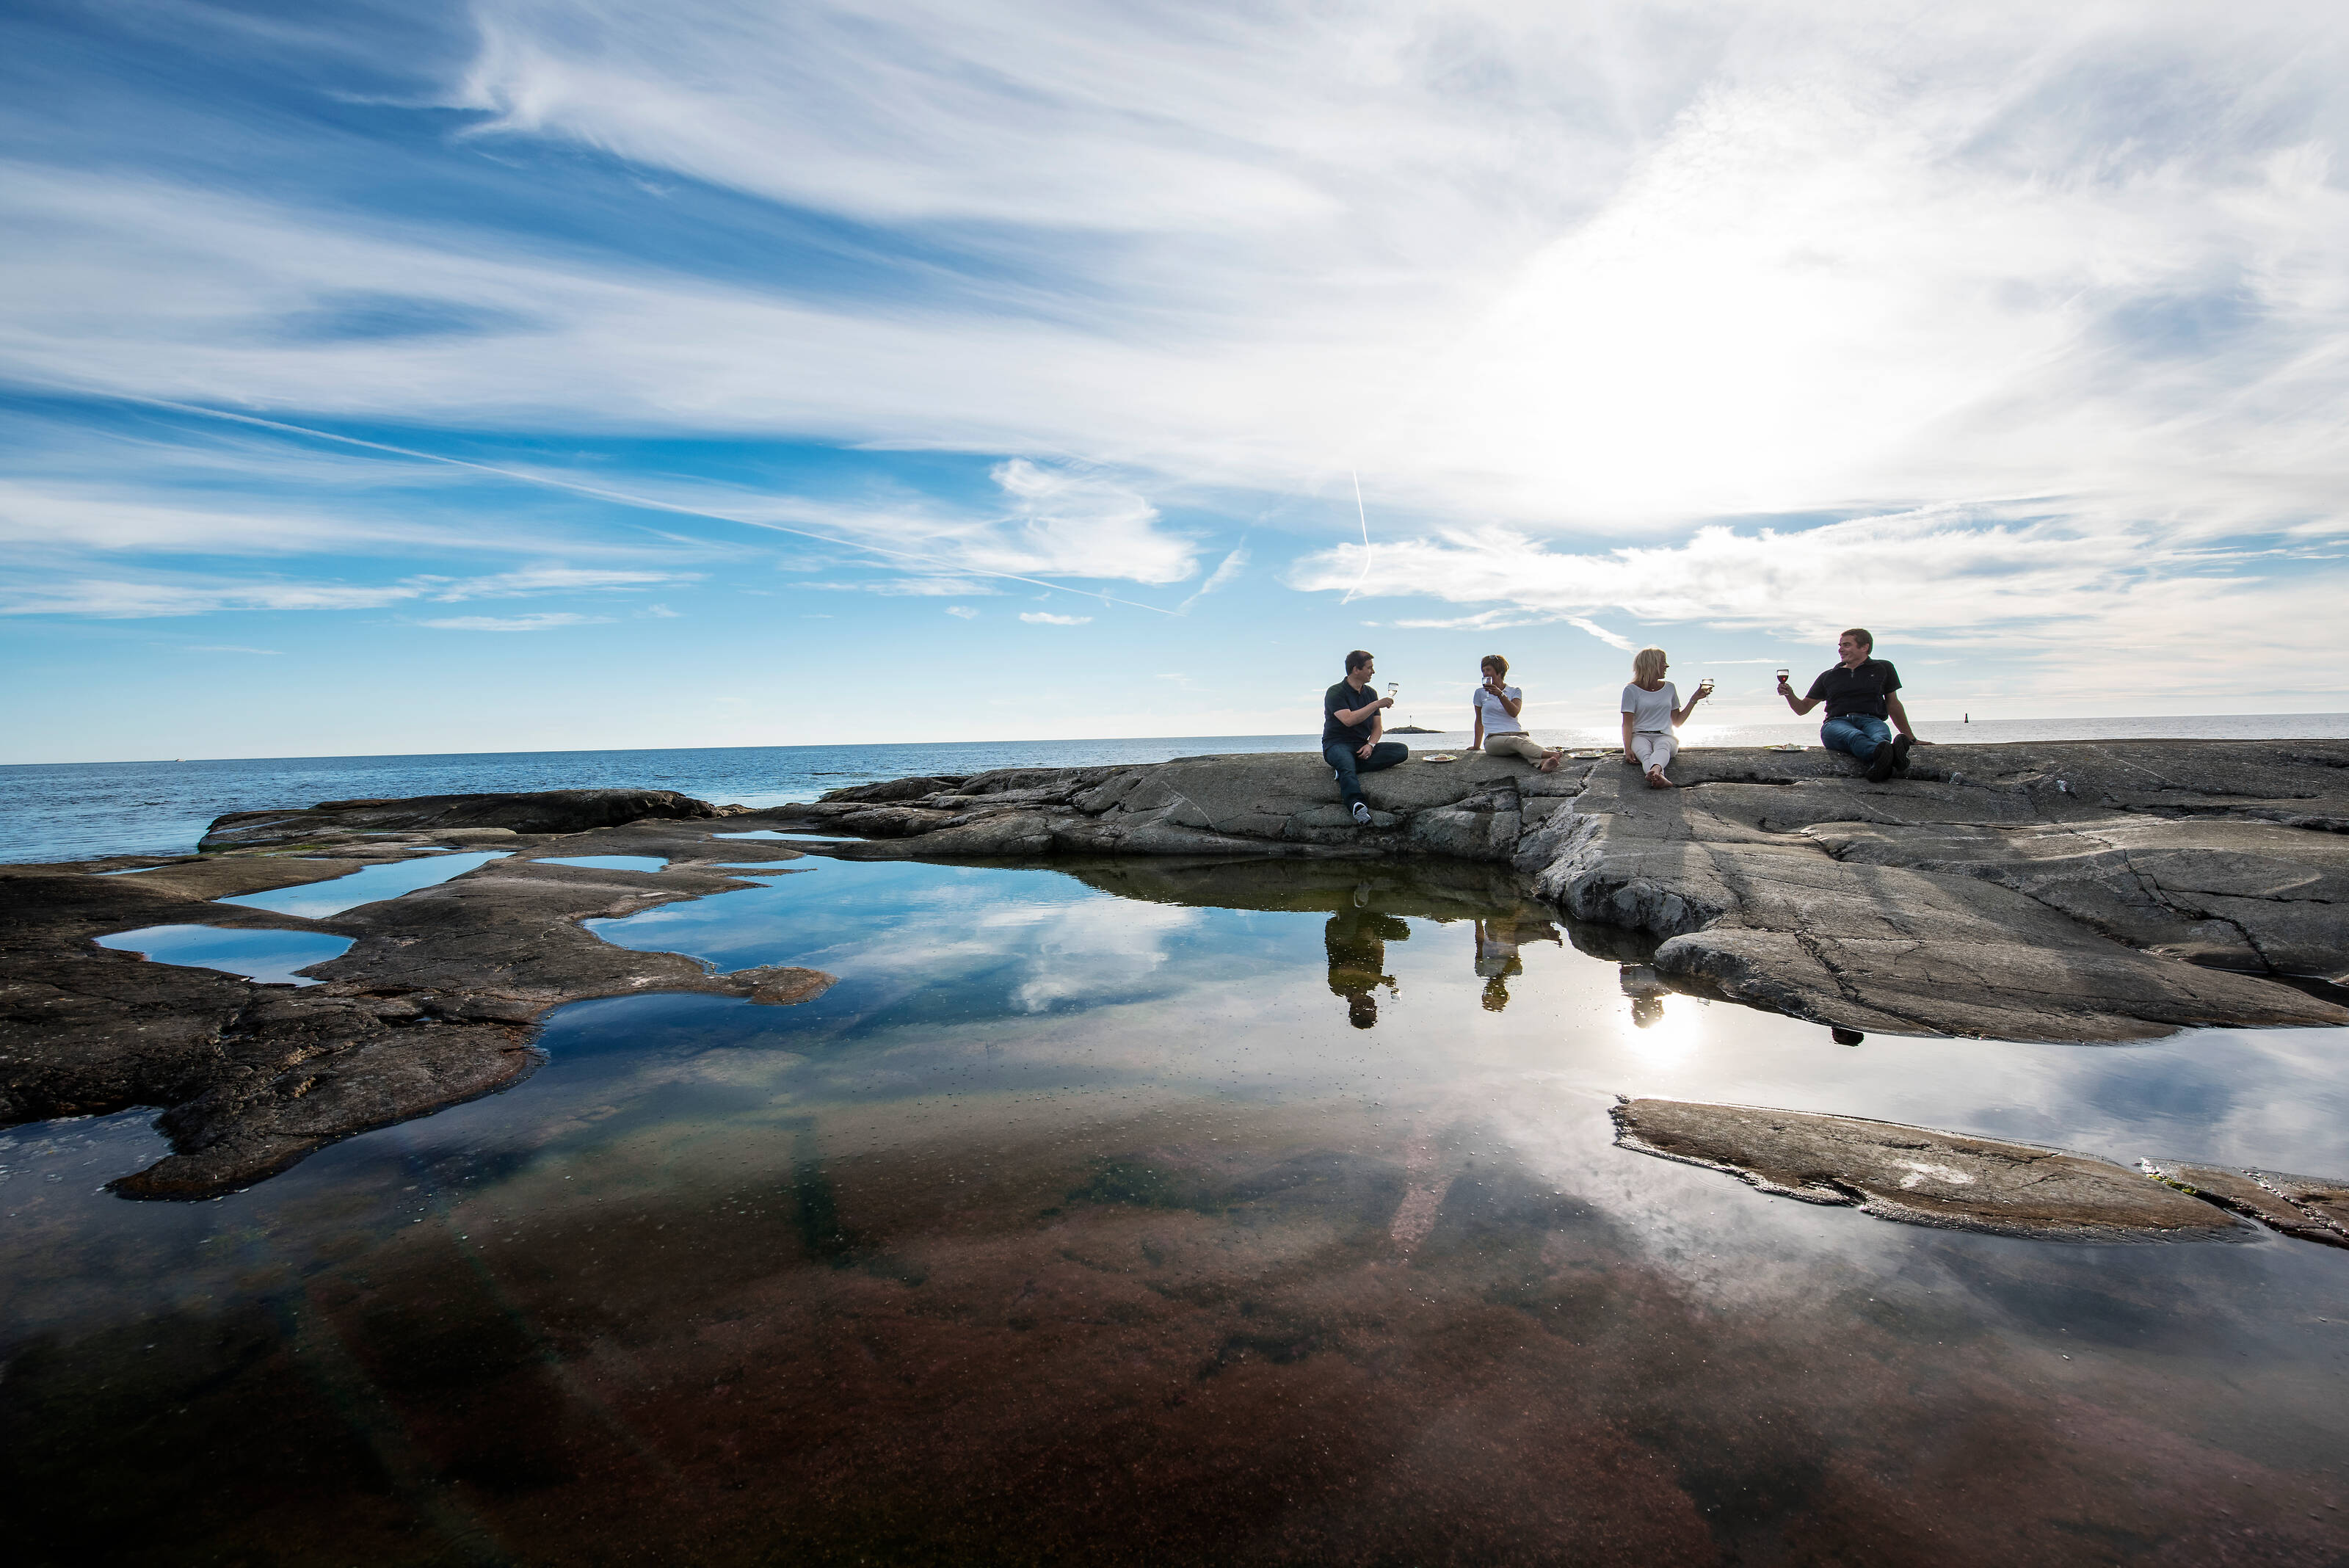 A group of friends sitting in the distance on top of cliffs by the sea on a sunny day in the archipelago.